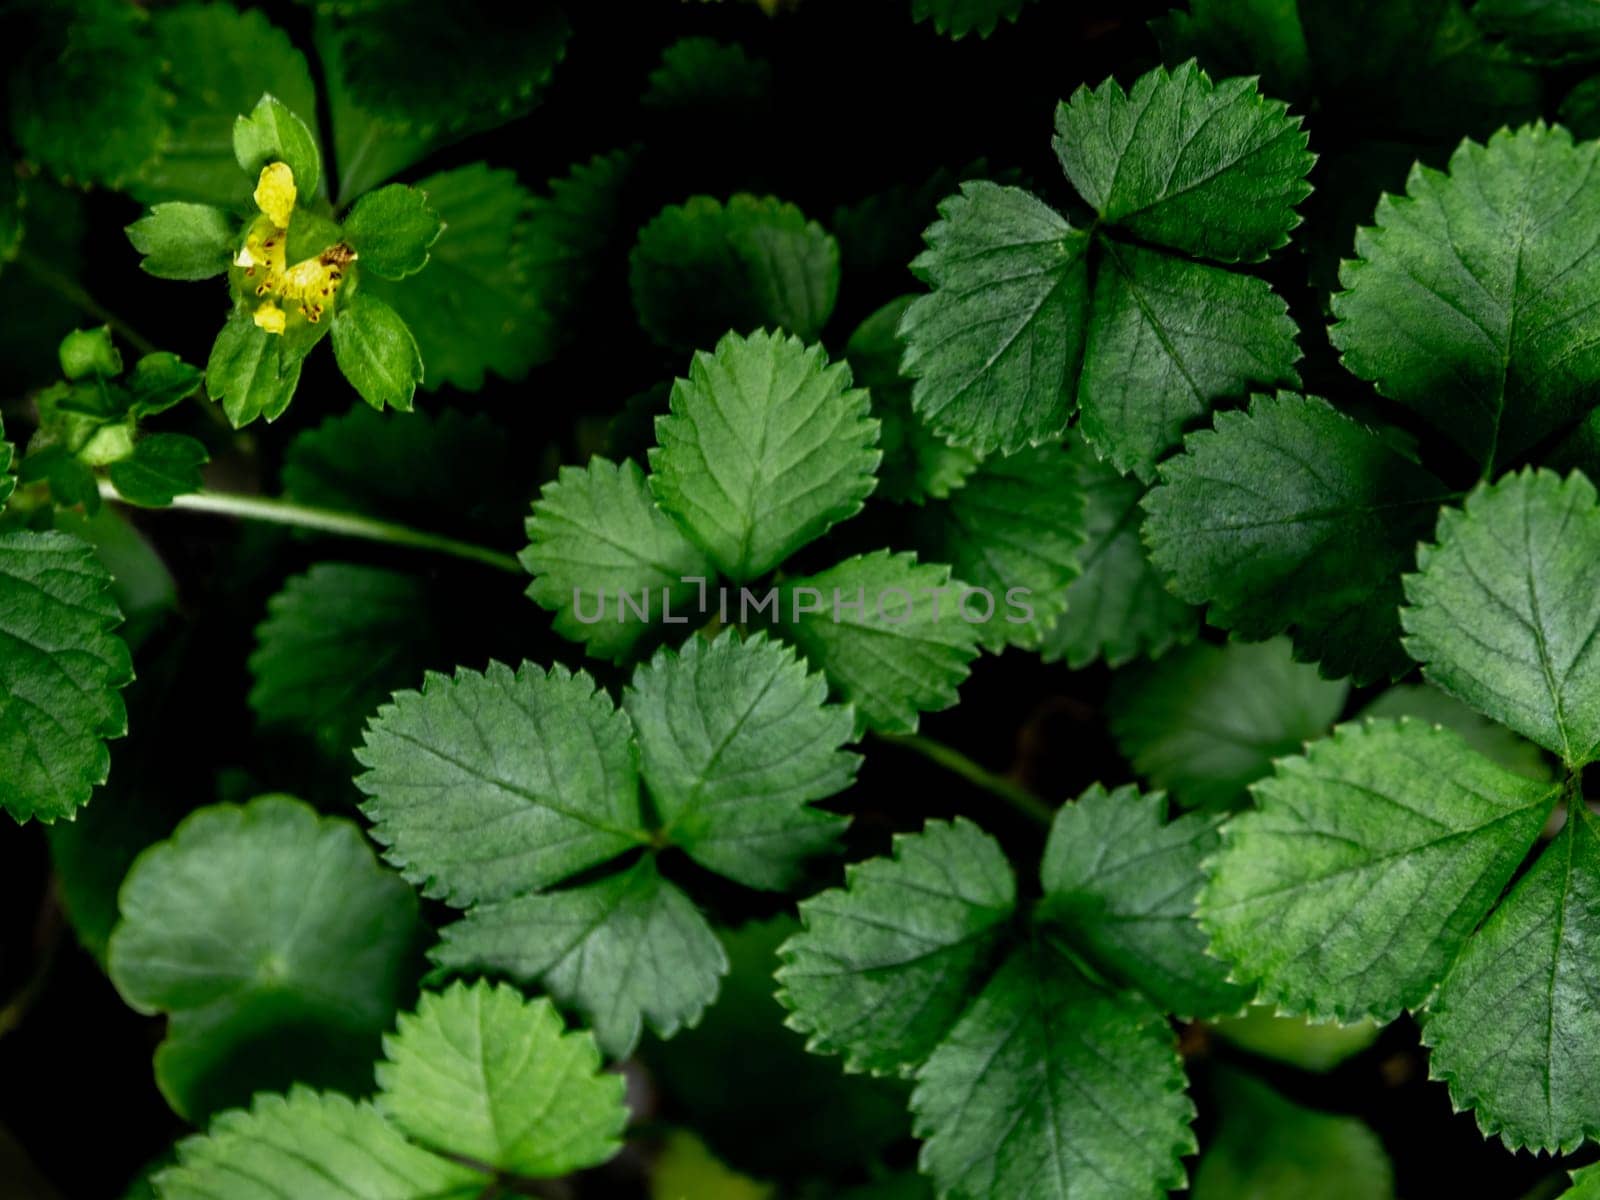 The Mock Strawberry plant for ground cover in the garden by Satakorn